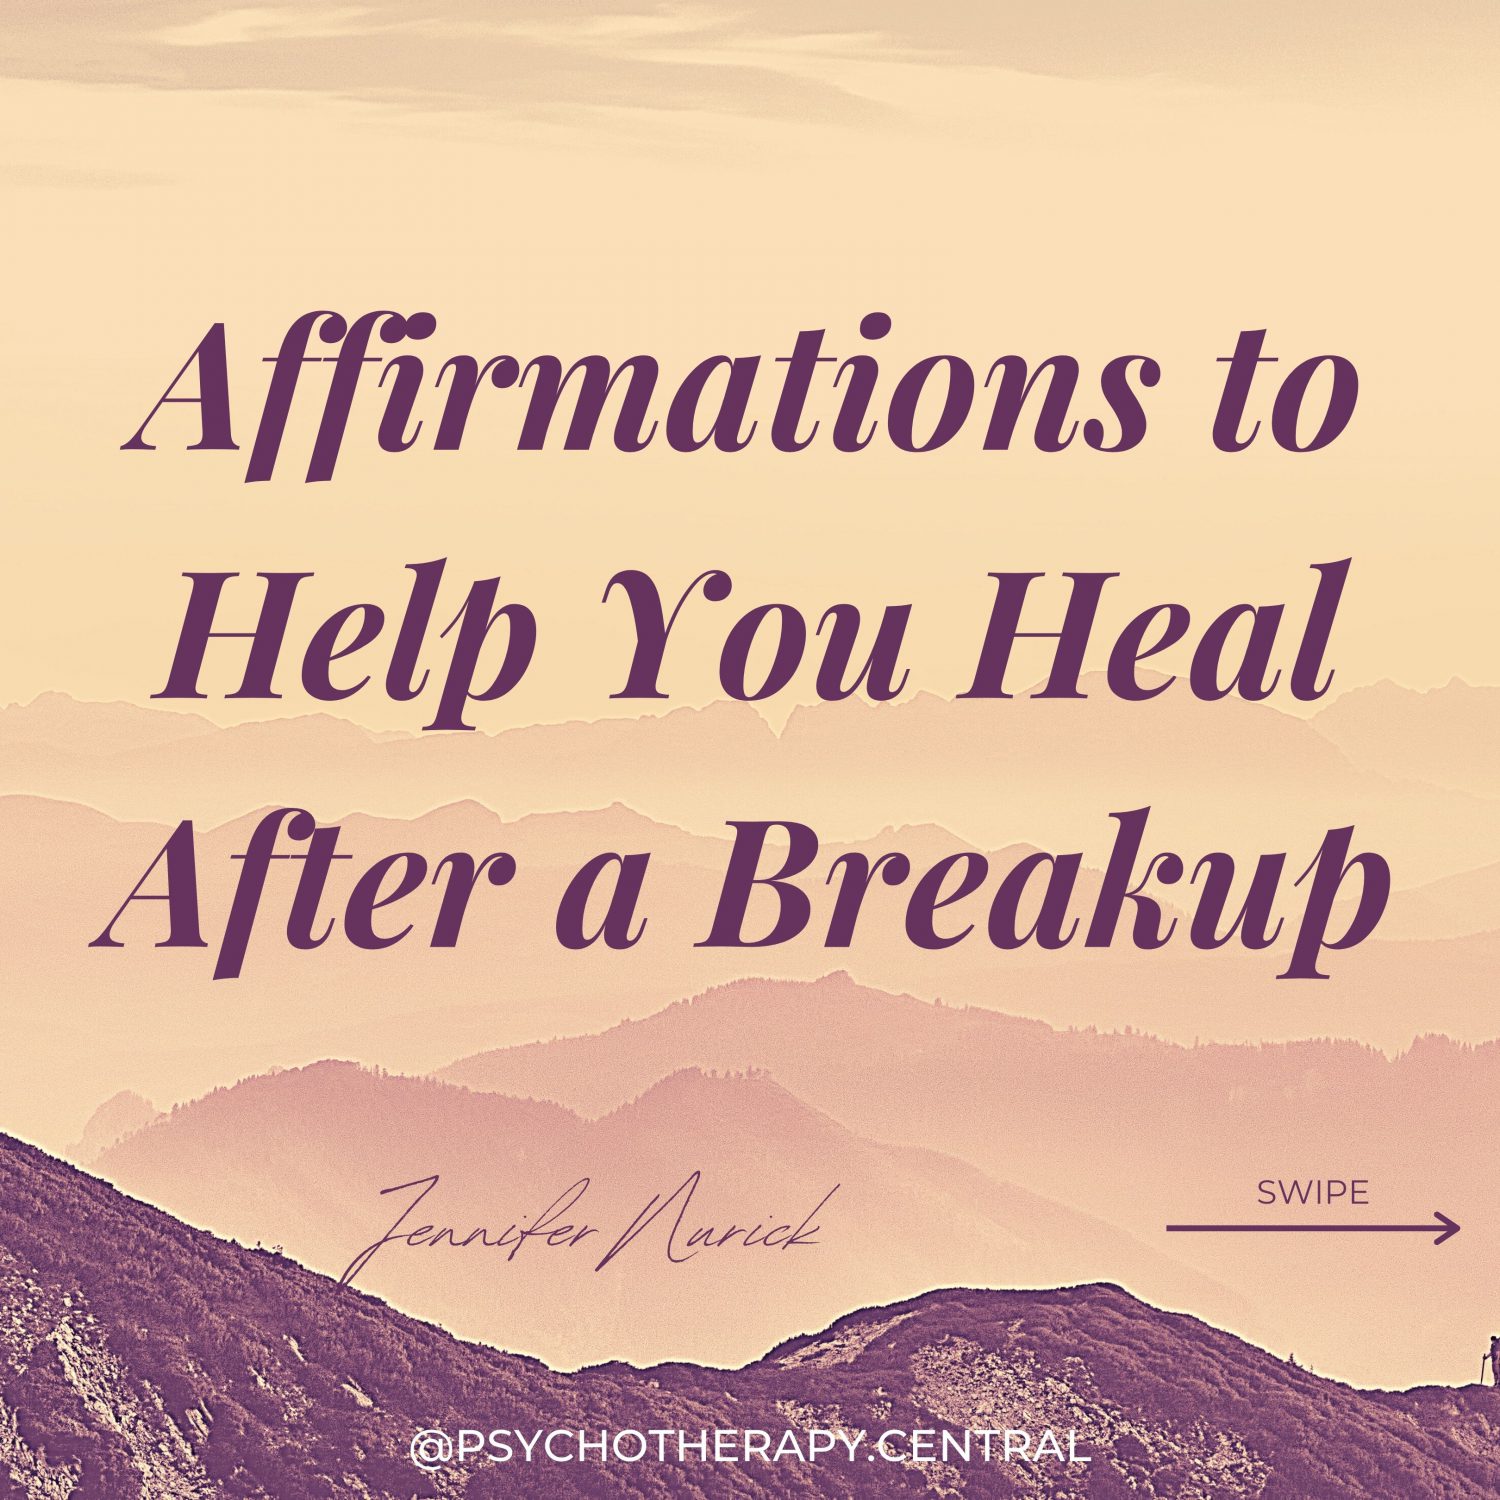 Affirmations to Help You Heal After a Breakup